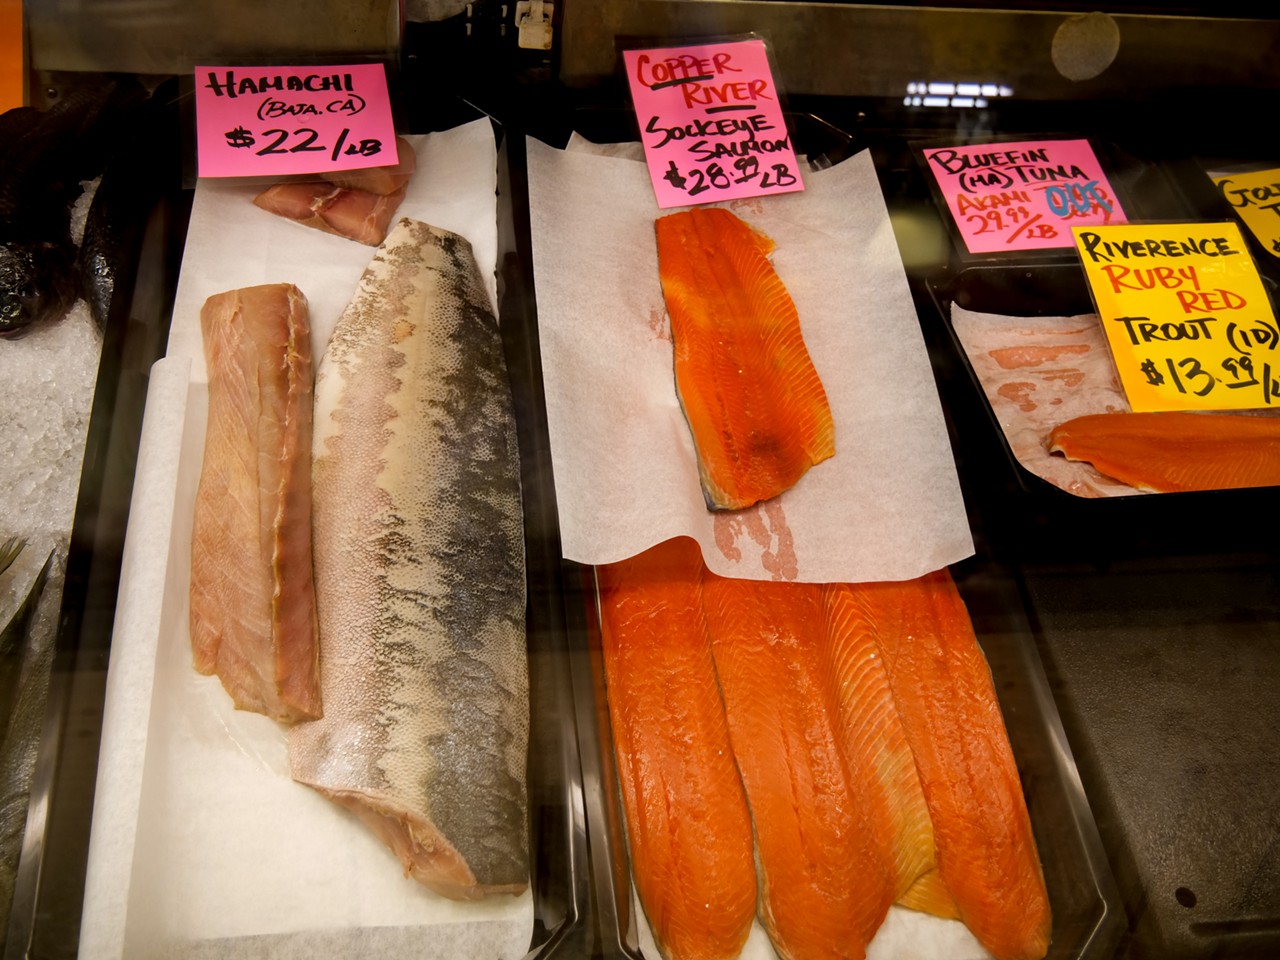 The shop also sells sashimi-grade seafood (meaning it can be eaten raw).